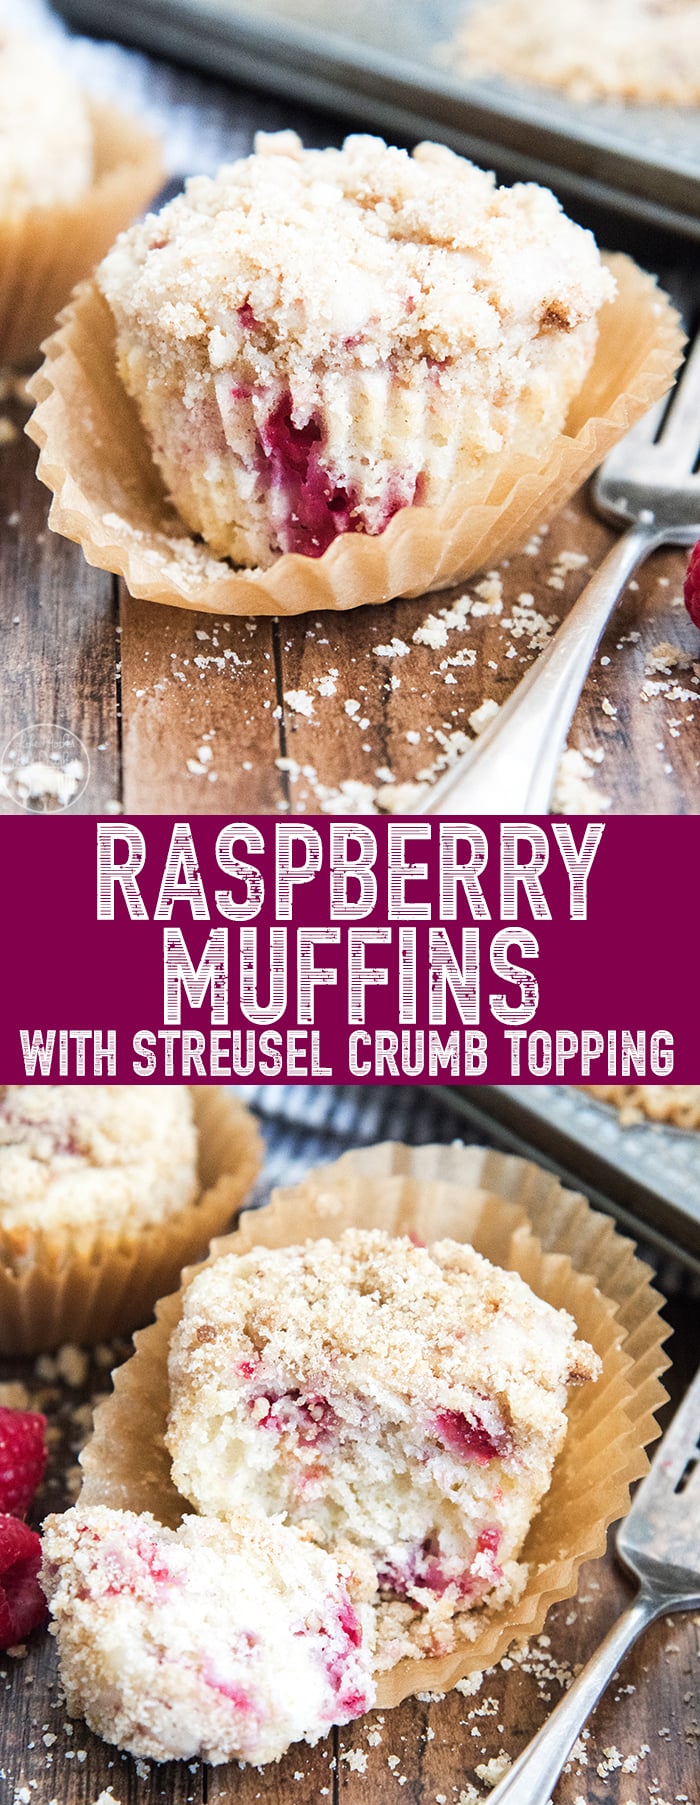 These Raspberry Muffins are sweet, moist, and soft; and are topped with the best sugary crumb topping! Perfect for breakfast, brunch, or a snack!